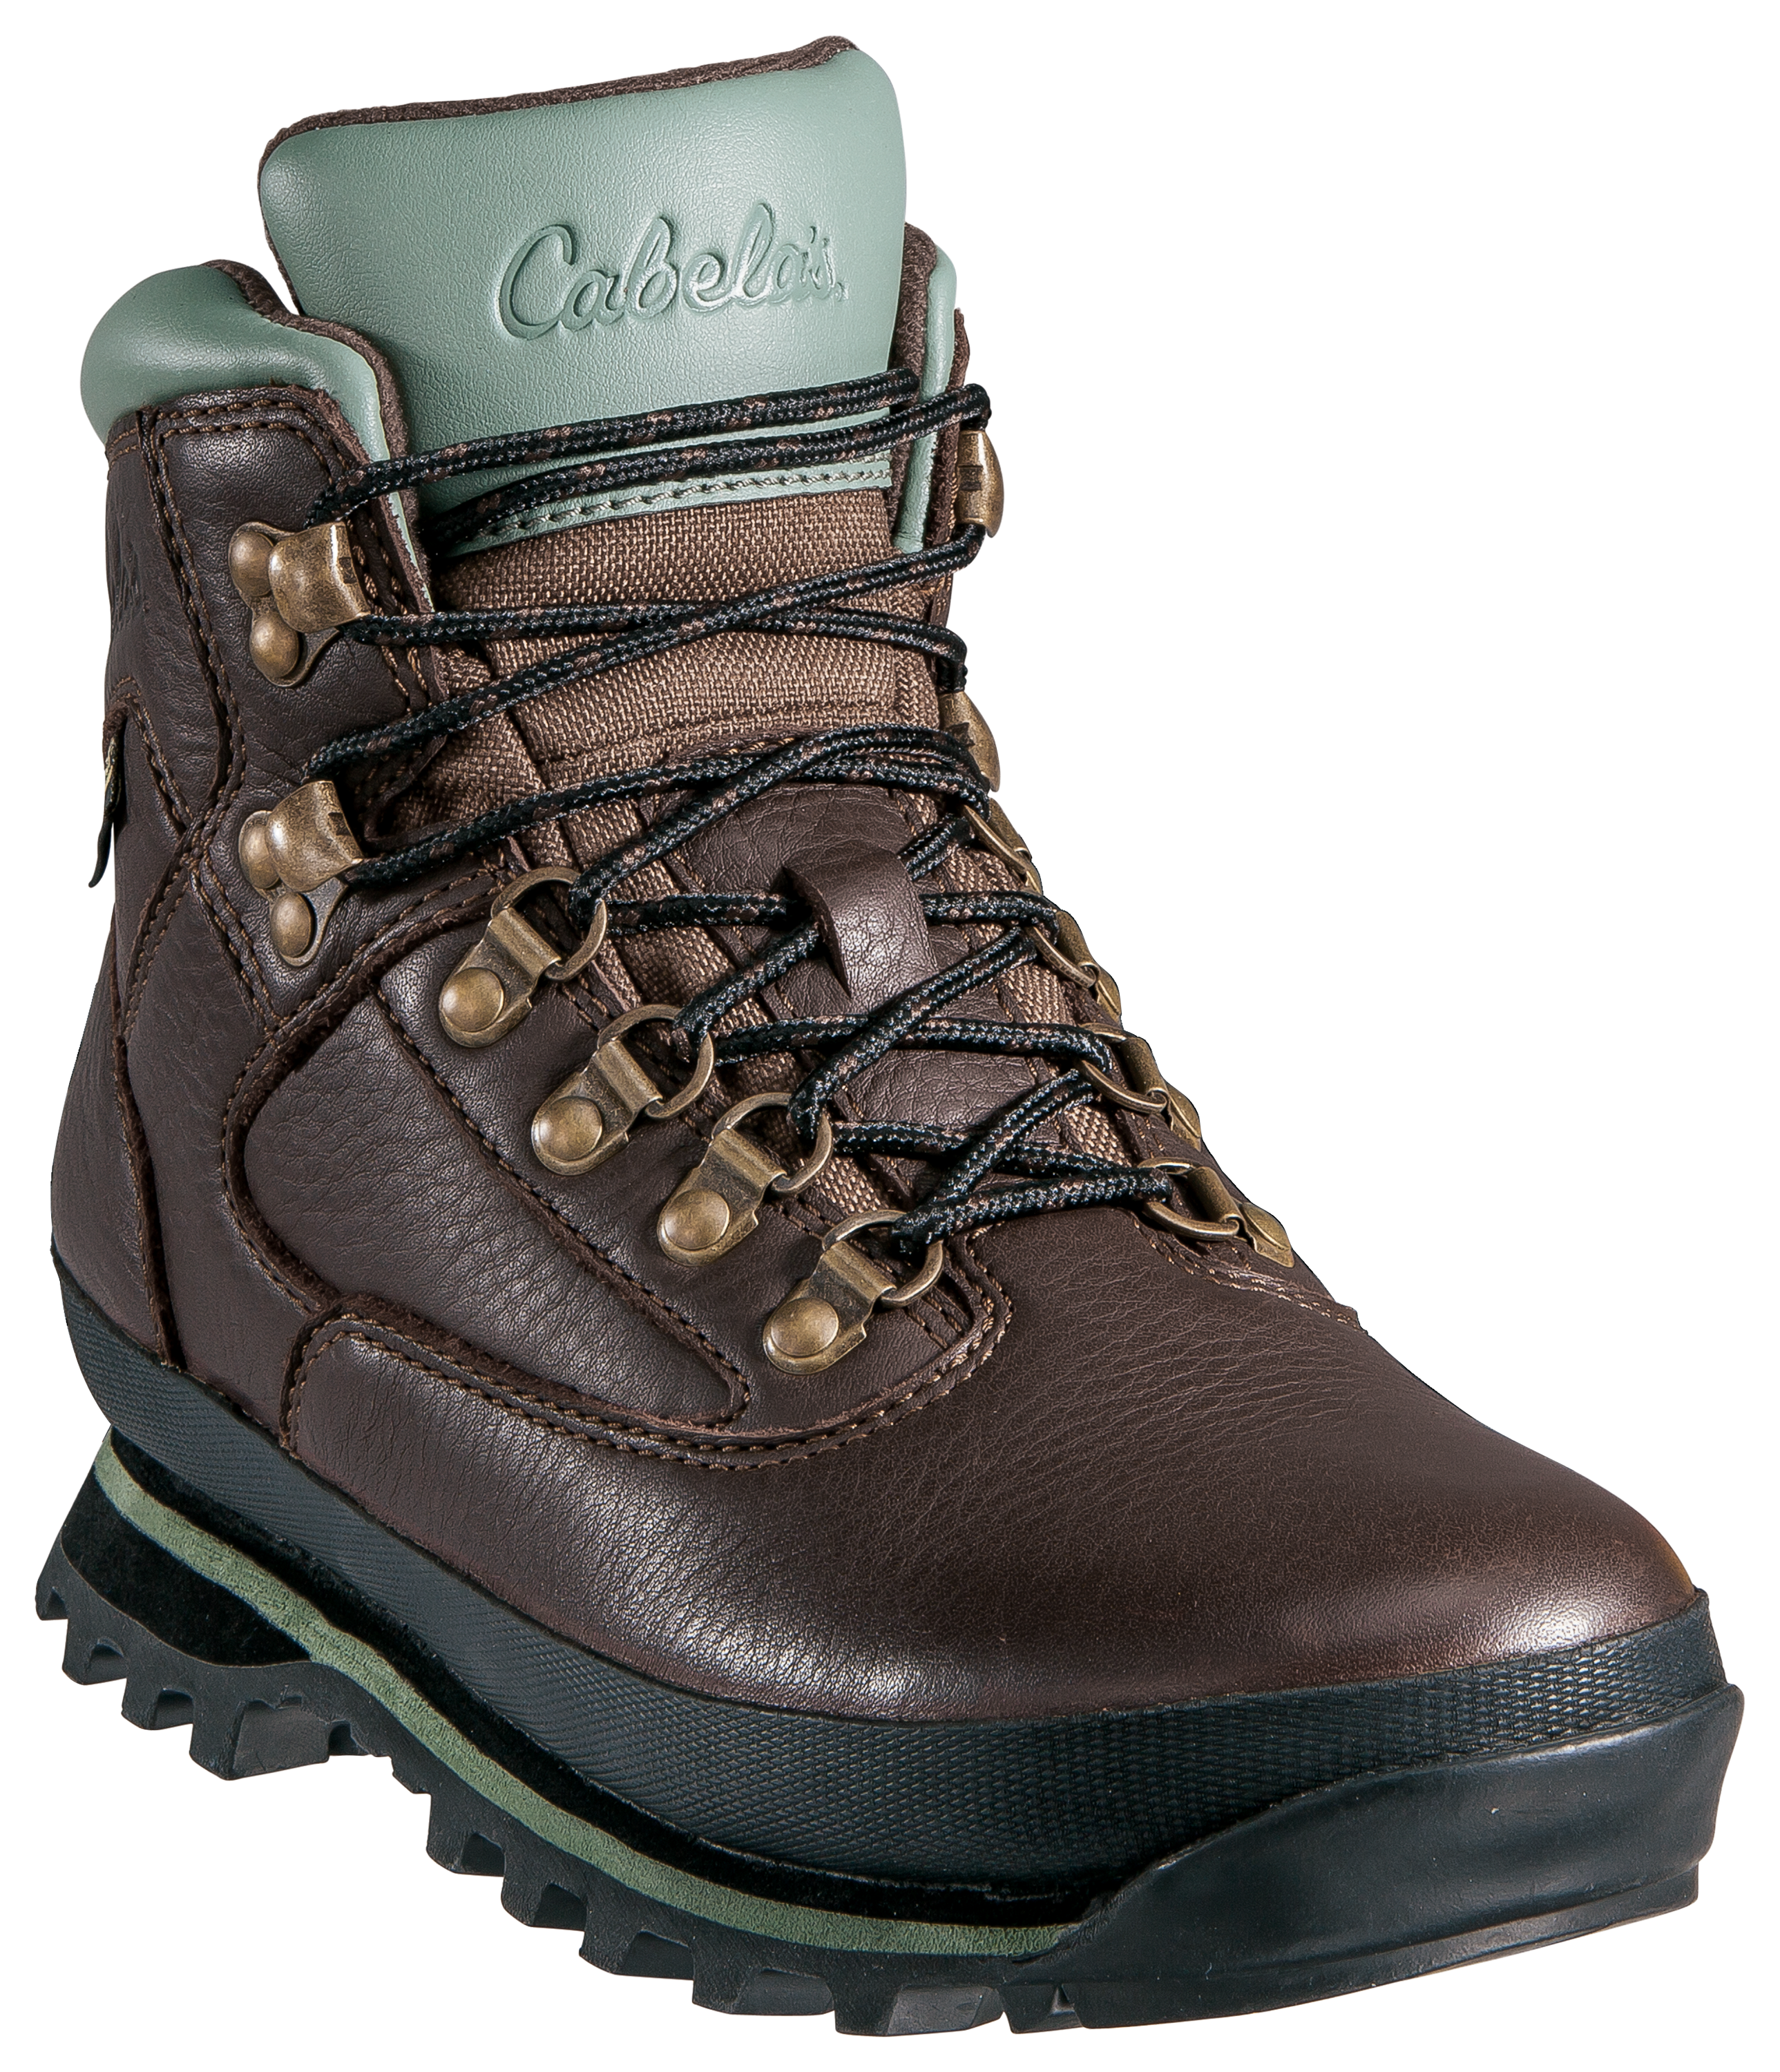 Cabela's Rimrock Mid GORE-TEX Hiking Boots for Ladies - Brown - 6 M